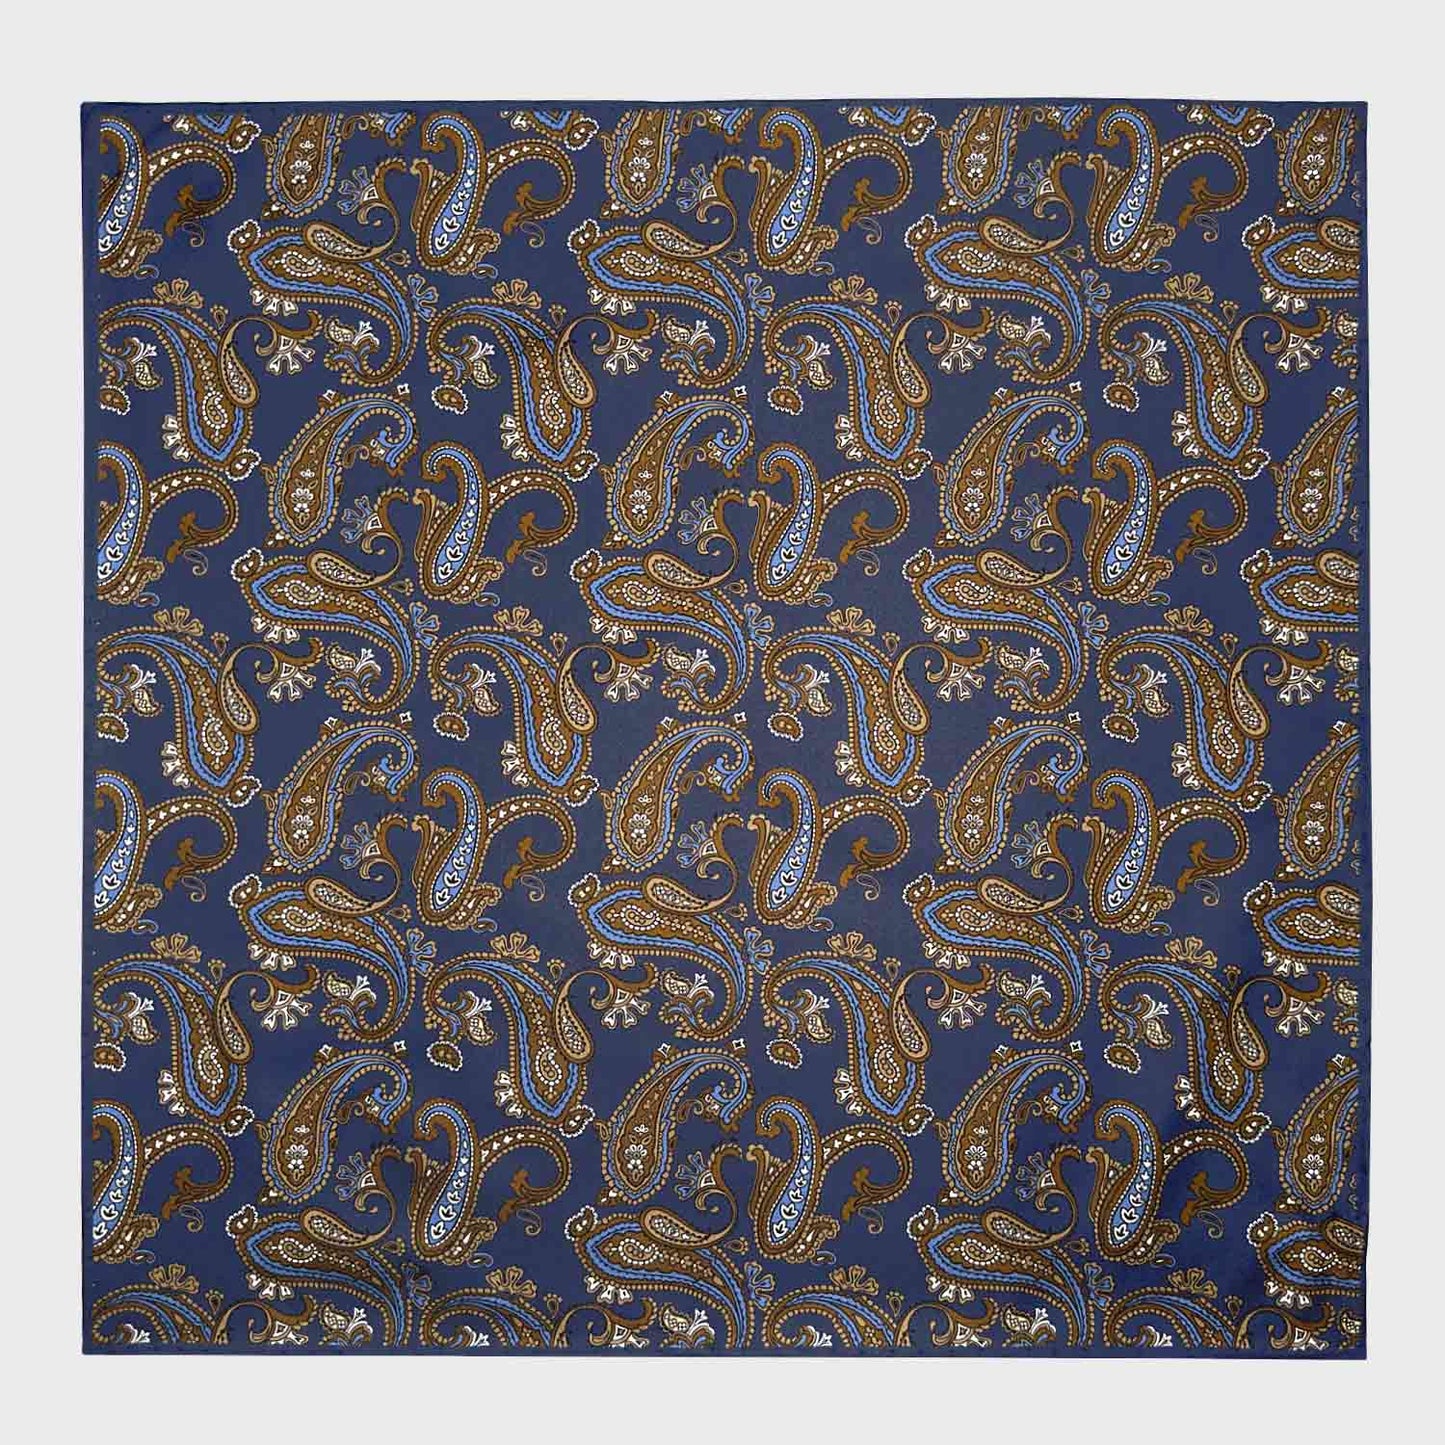 Pickled Bluewood Silk Pocket Square Paisley Pattern. Men's paisley pocket square made with soft silk and with rolled edge, pickled bluewood background with clay brown and white paisley pattern, ideal for a refined men's outfit